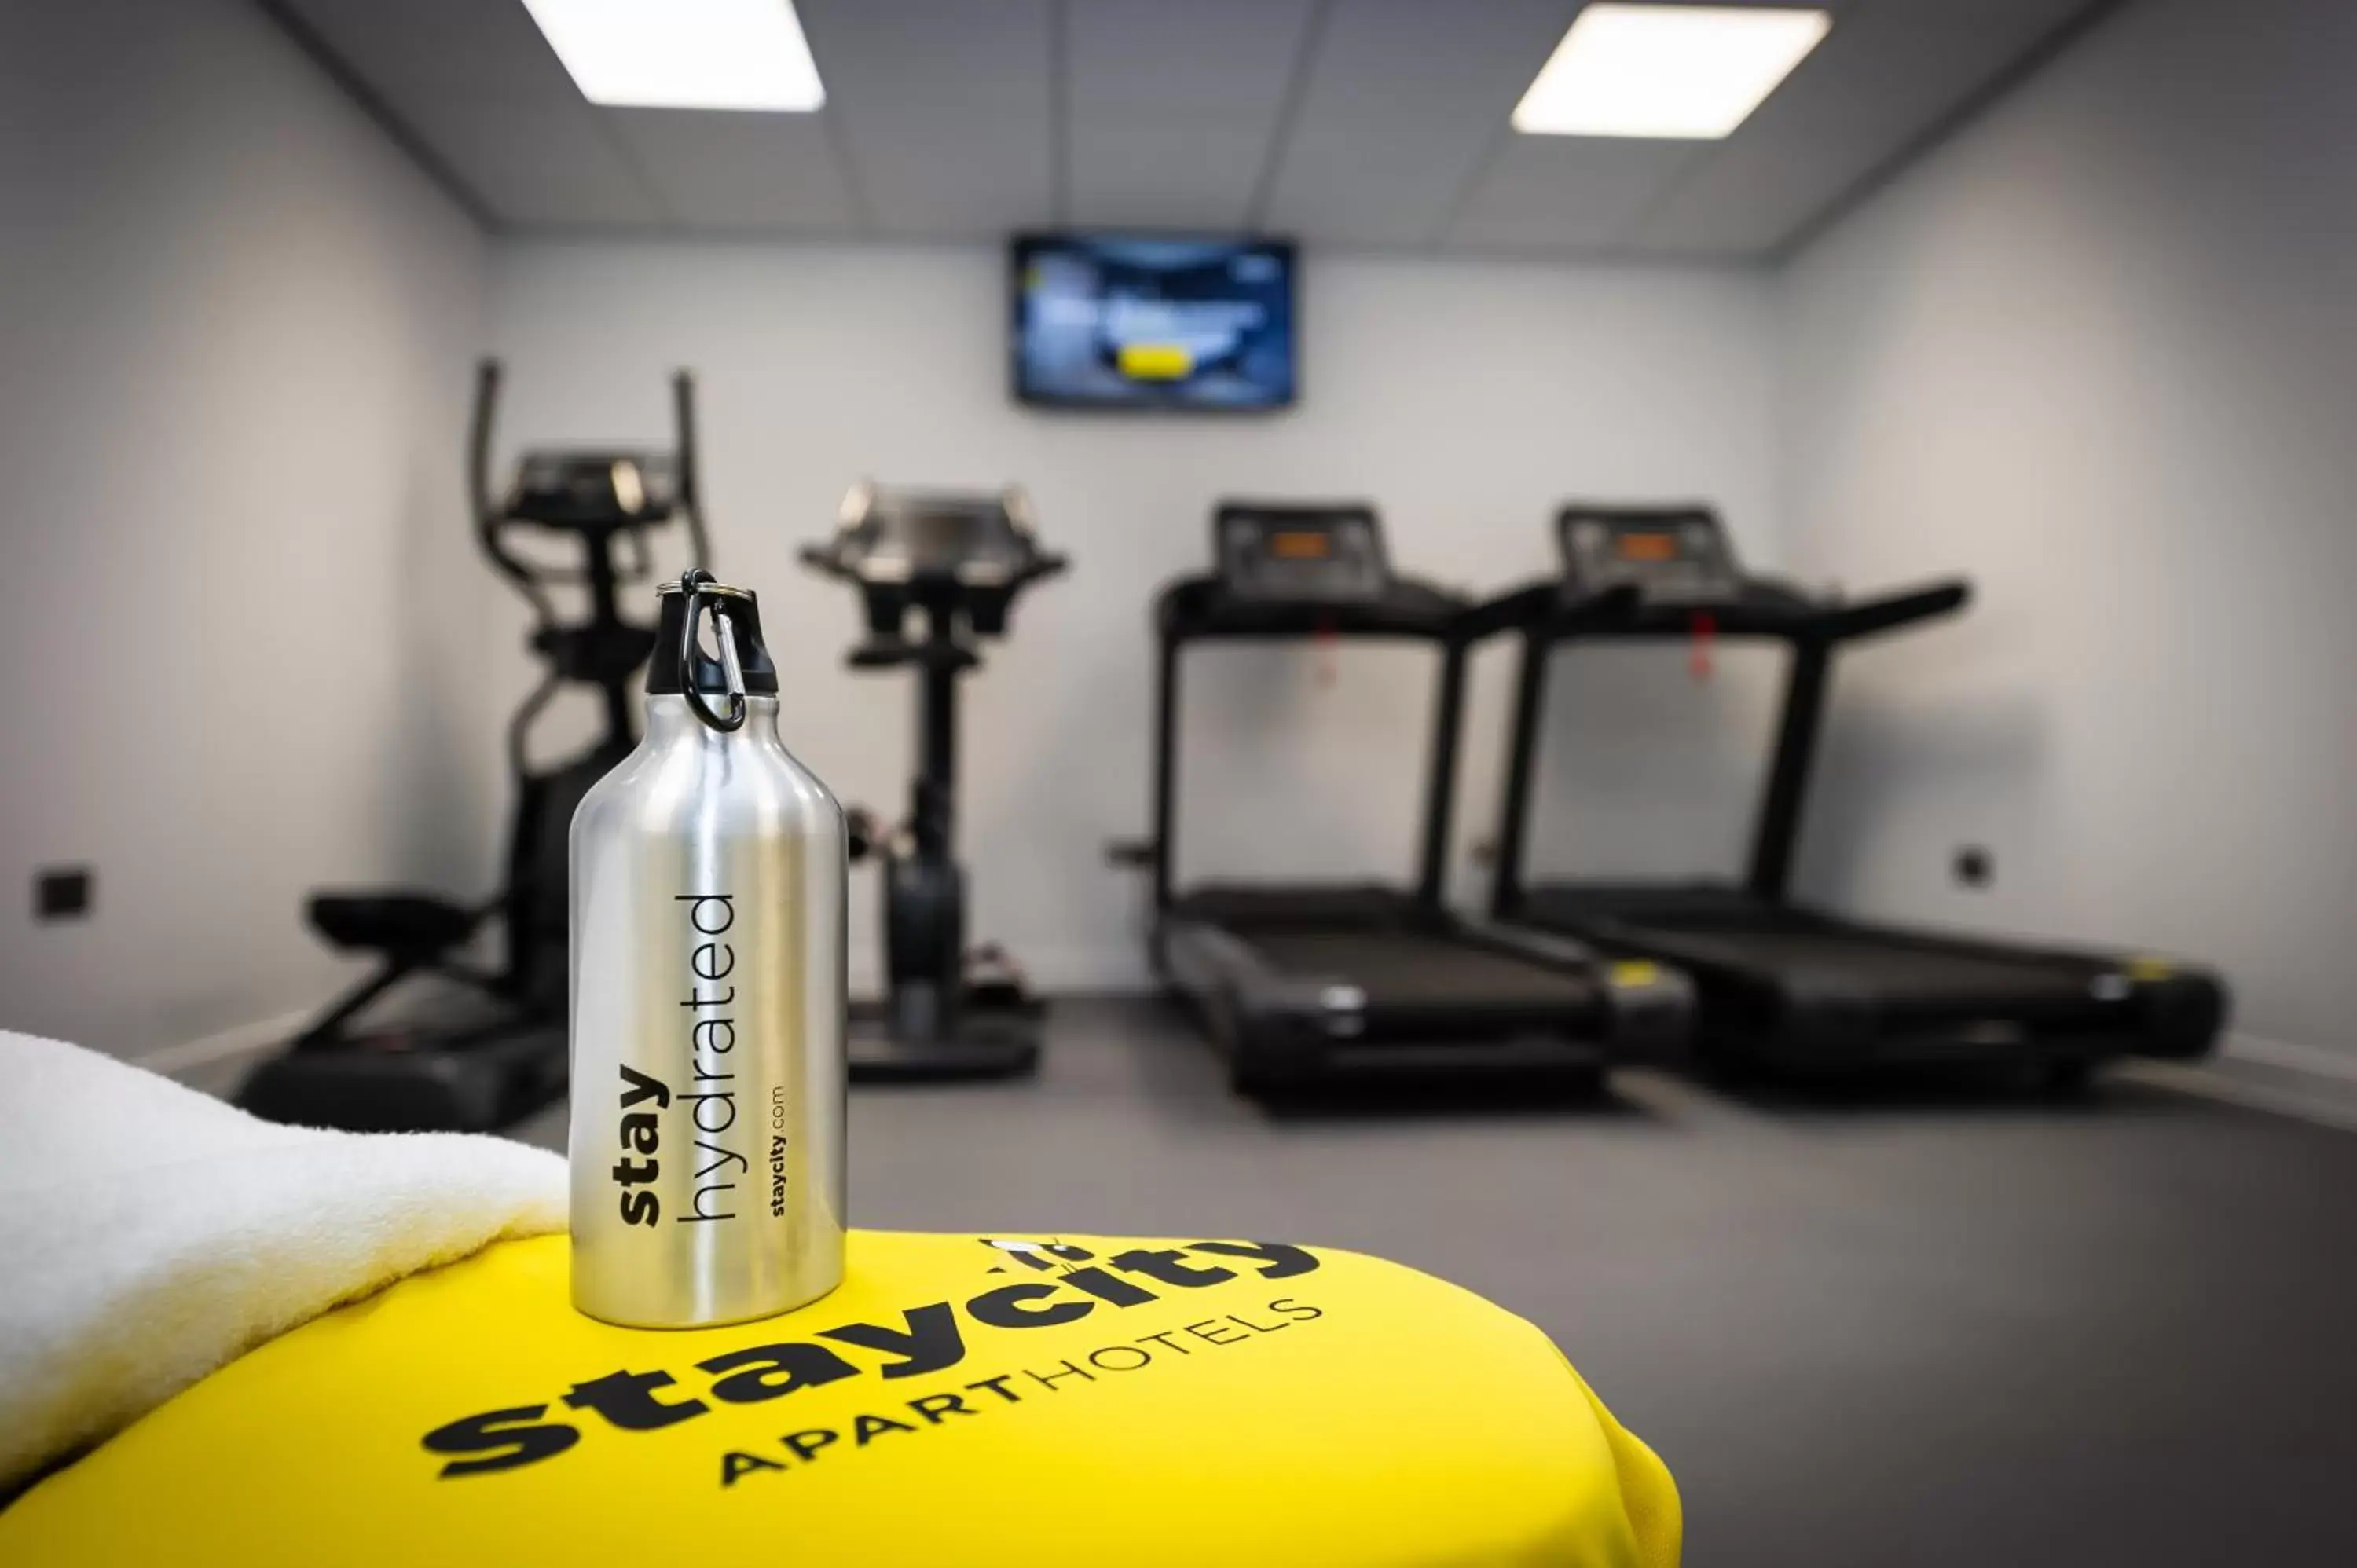 Fitness centre/facilities, Fitness Center/Facilities in Staycity Aparthotels Manchester Piccadilly